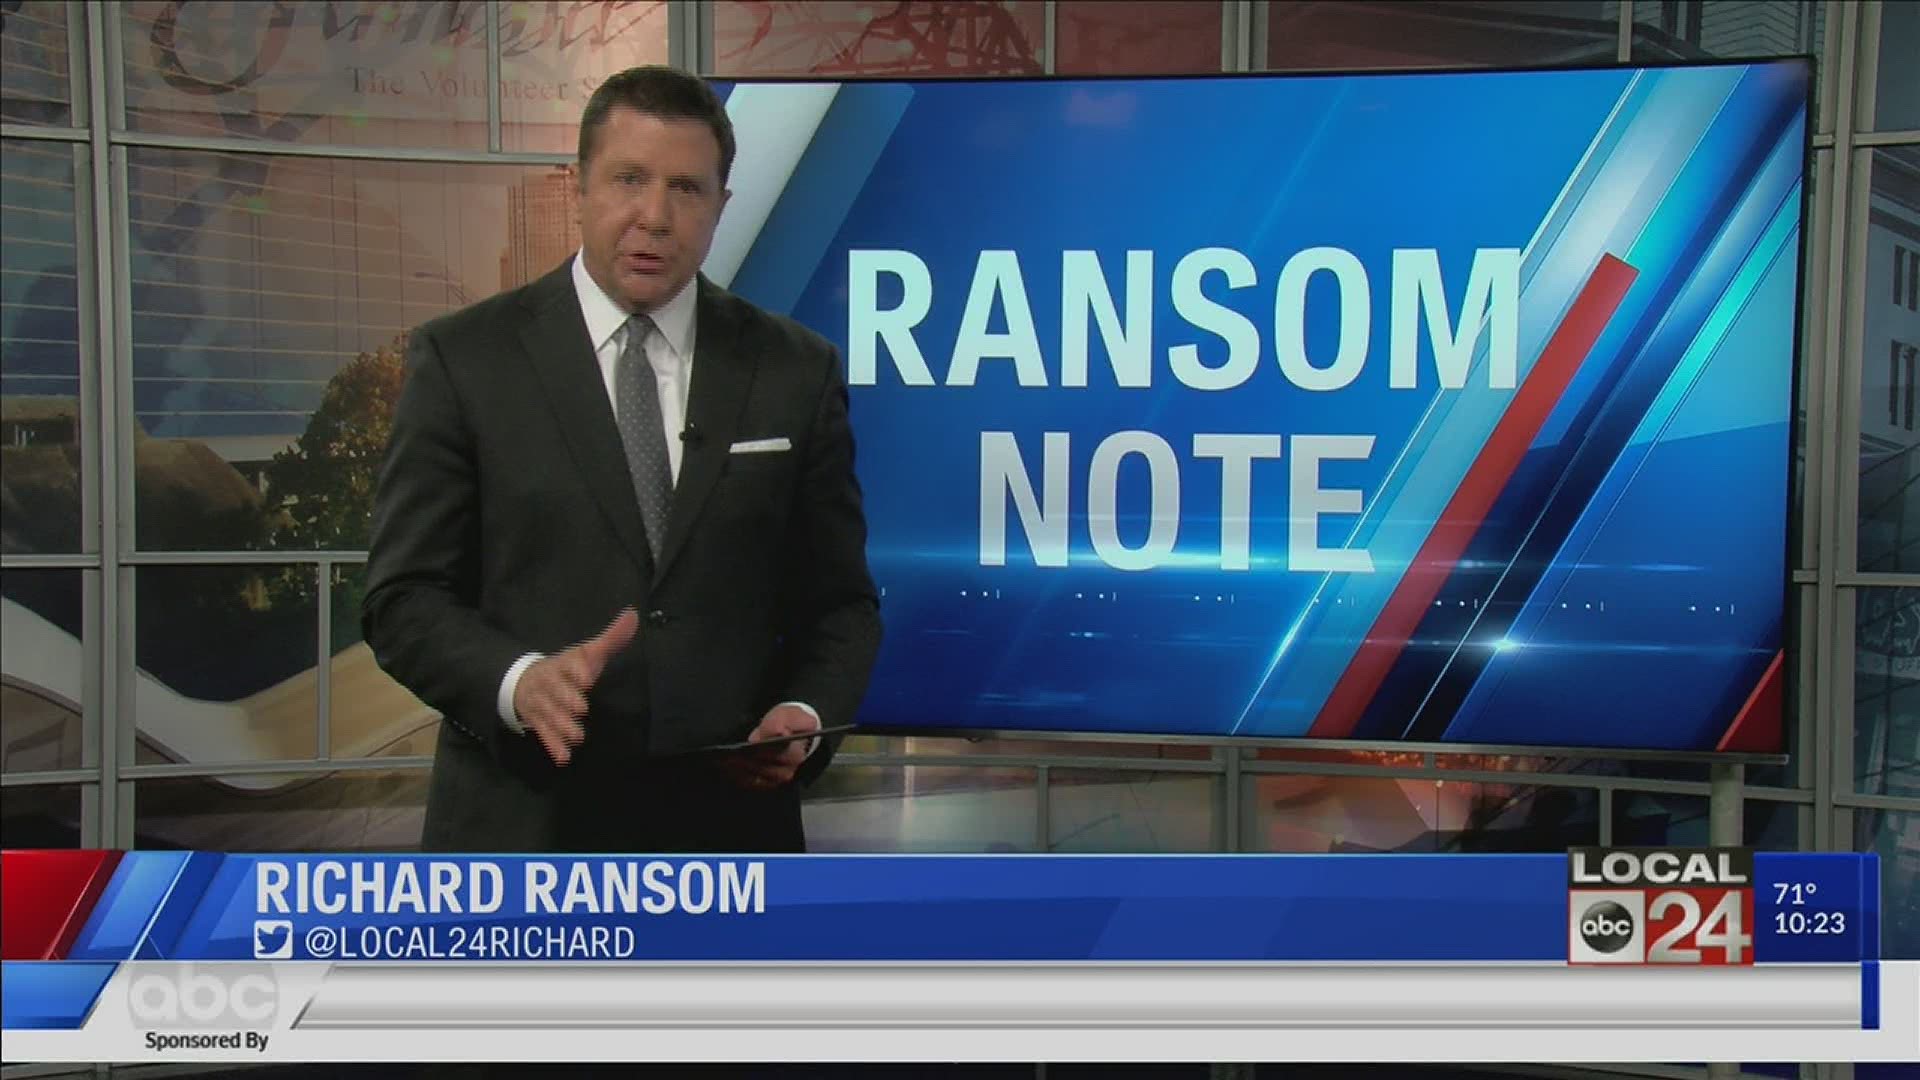 Local 24 News anchor Richard Ransom looks at TVA's warning about MLGW leaving the supplier in his Ransom Note.